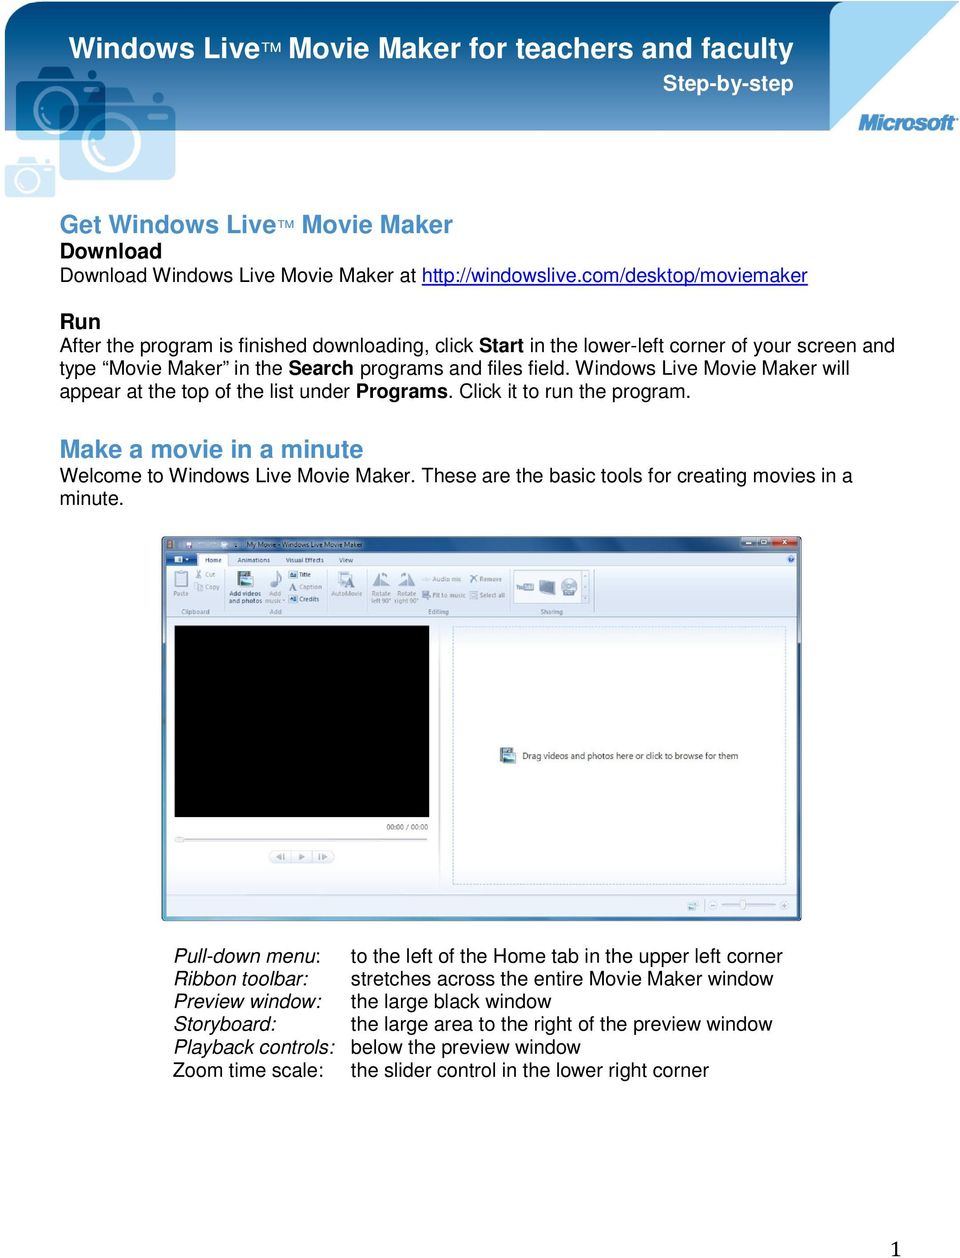 Windows Live Movie Maker will appear at the top of the list under Programs. Click it to run the program. Make a movie in a minute Welcome to Windows Live Movie Maker.